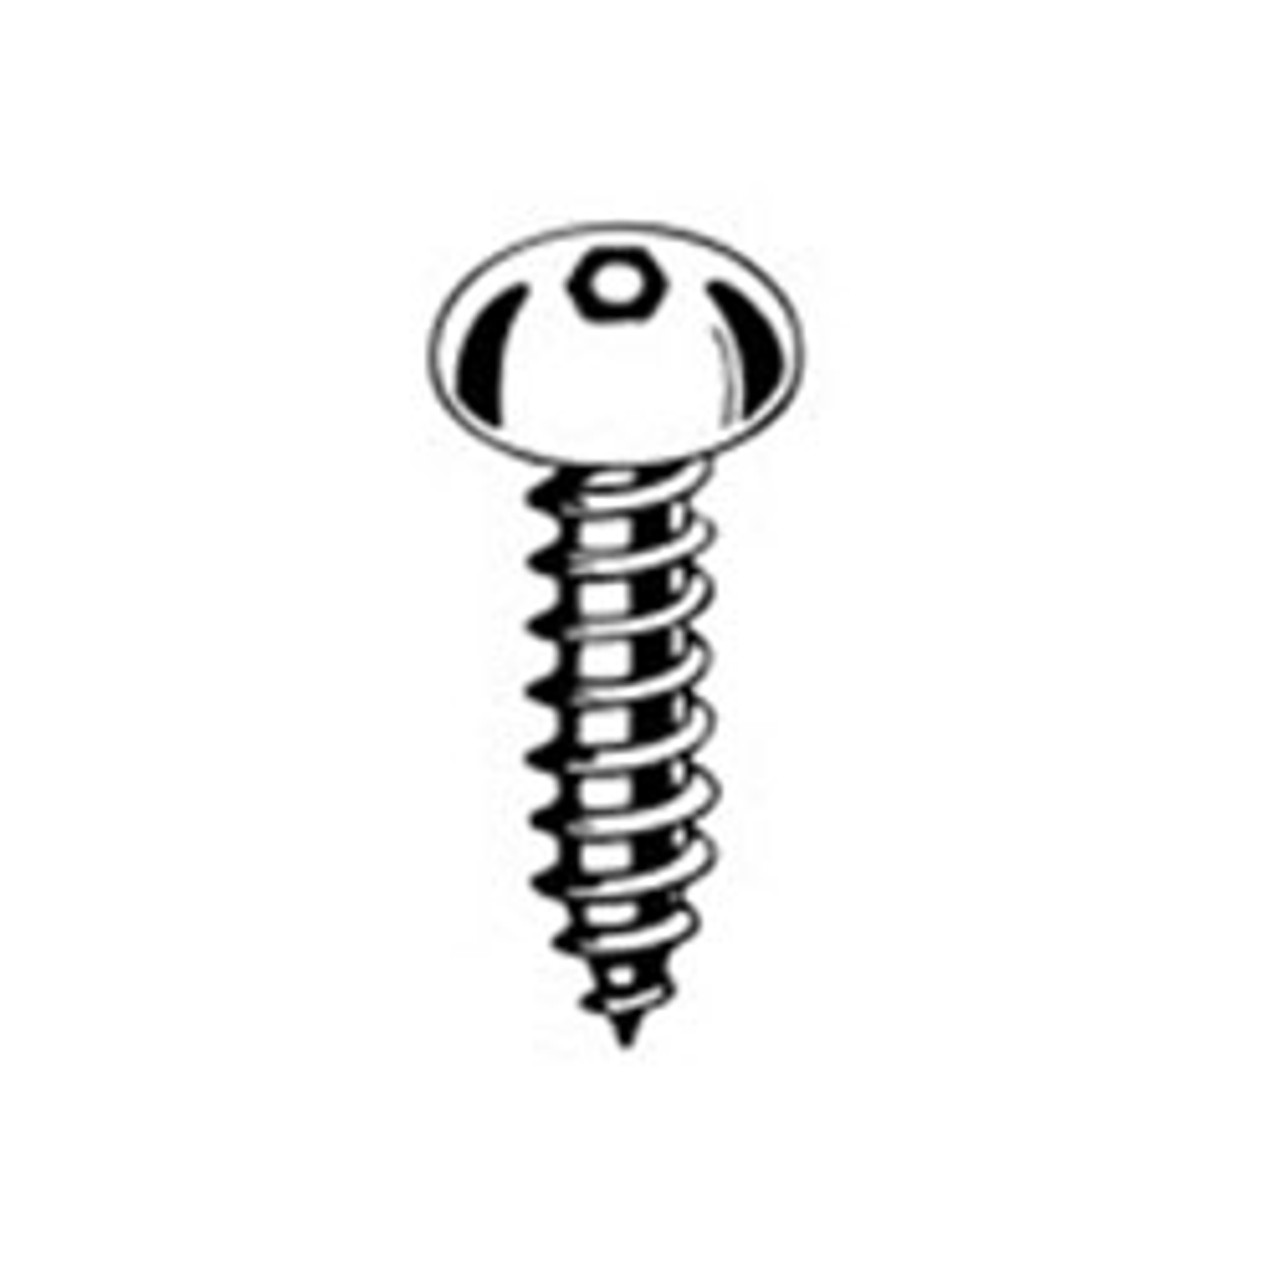 10AB x 1-1/2 Security Button Cap Screws SS AFT Fasteners